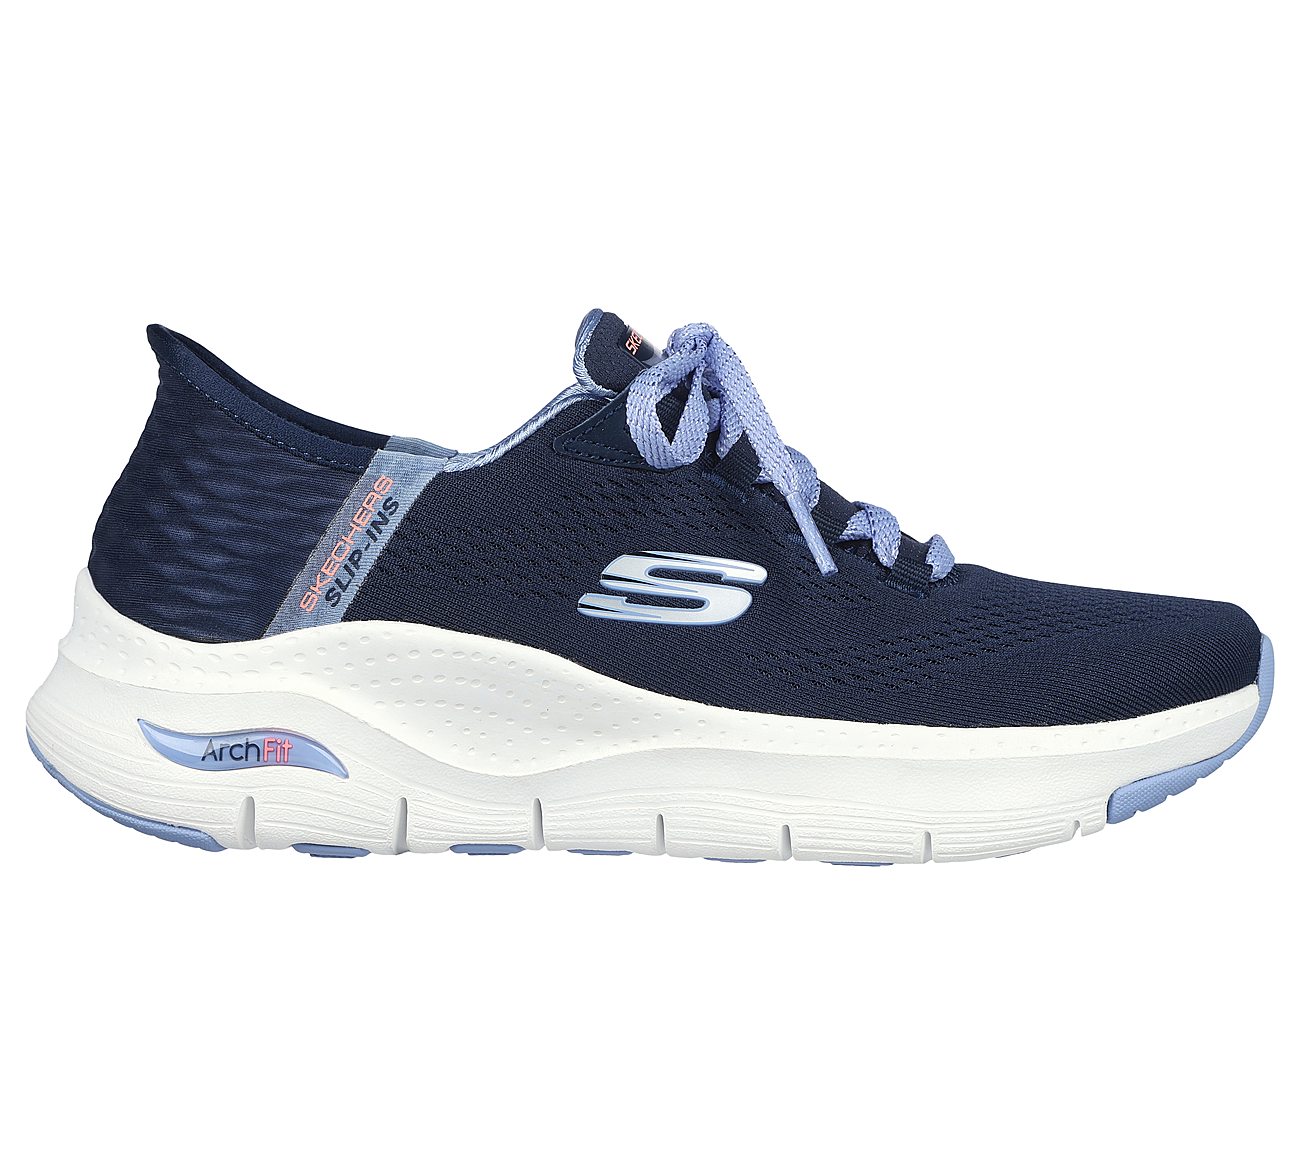 ARCH FIT, NAVY/MULTI Footwear Lateral View